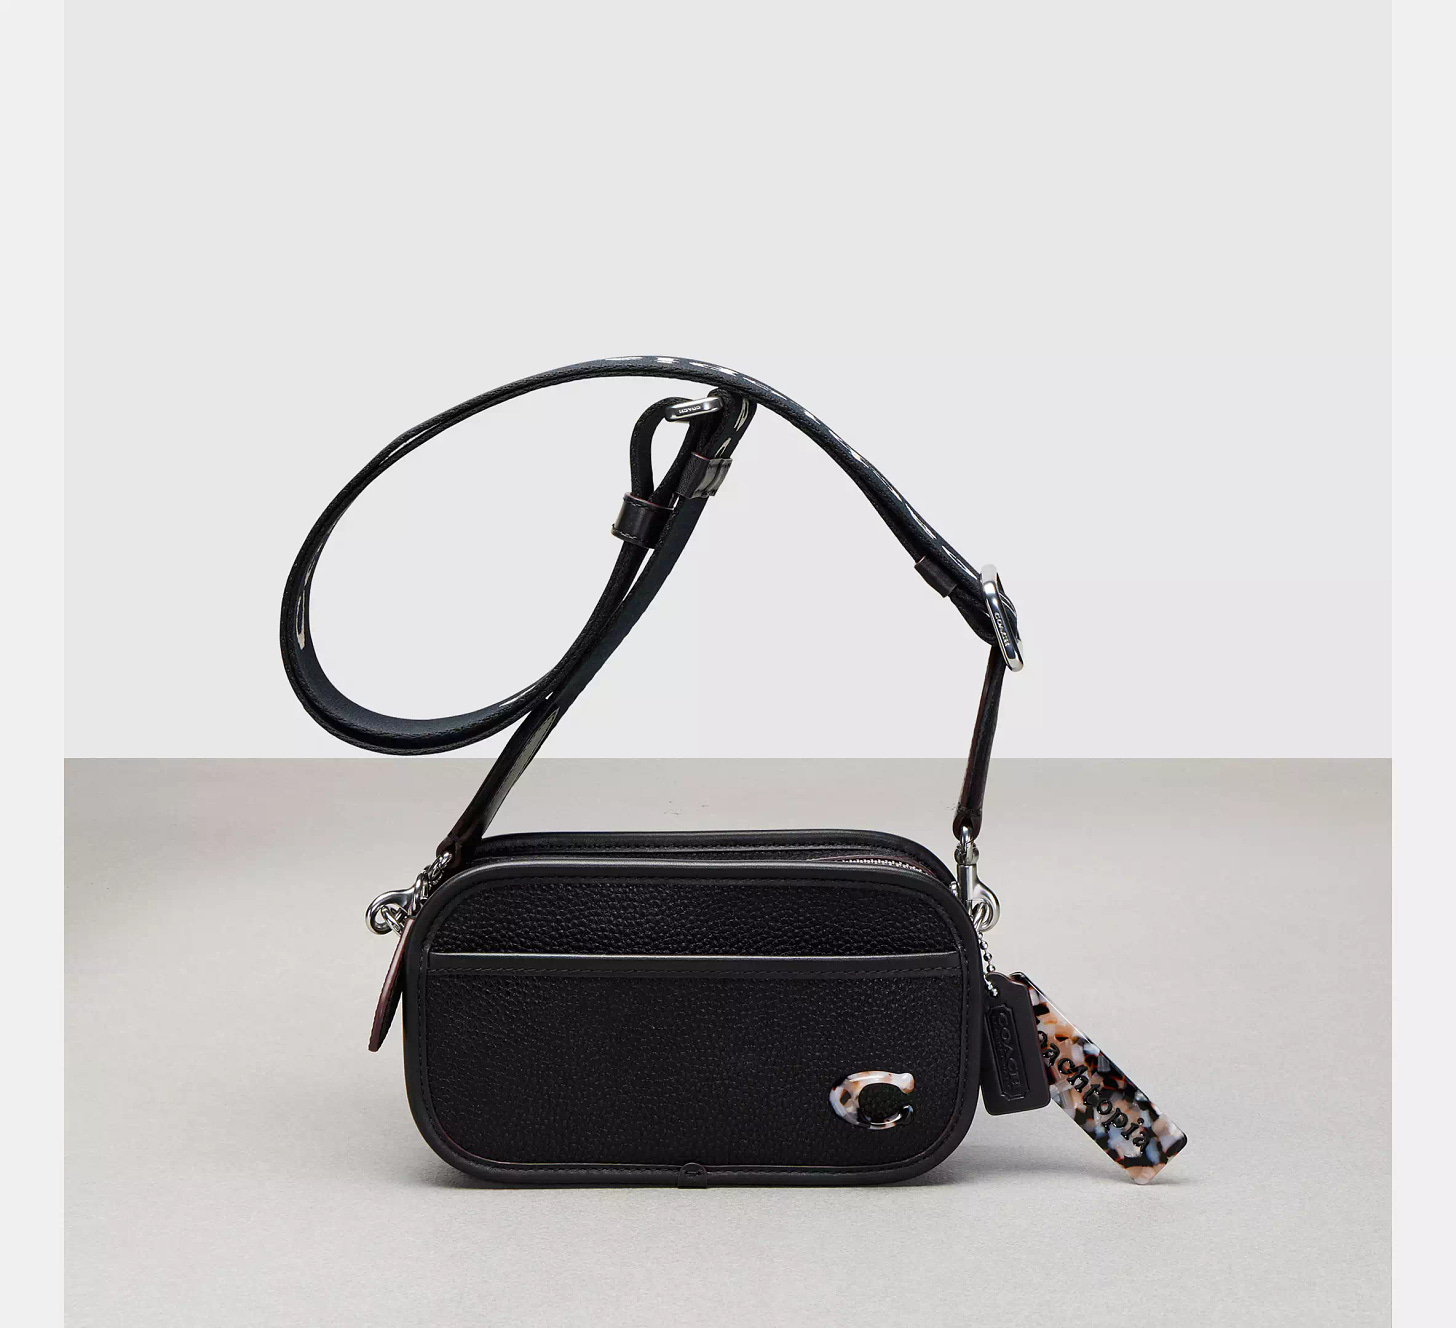 A black peddled leather Coach crossbody bag with a C logo on the front.